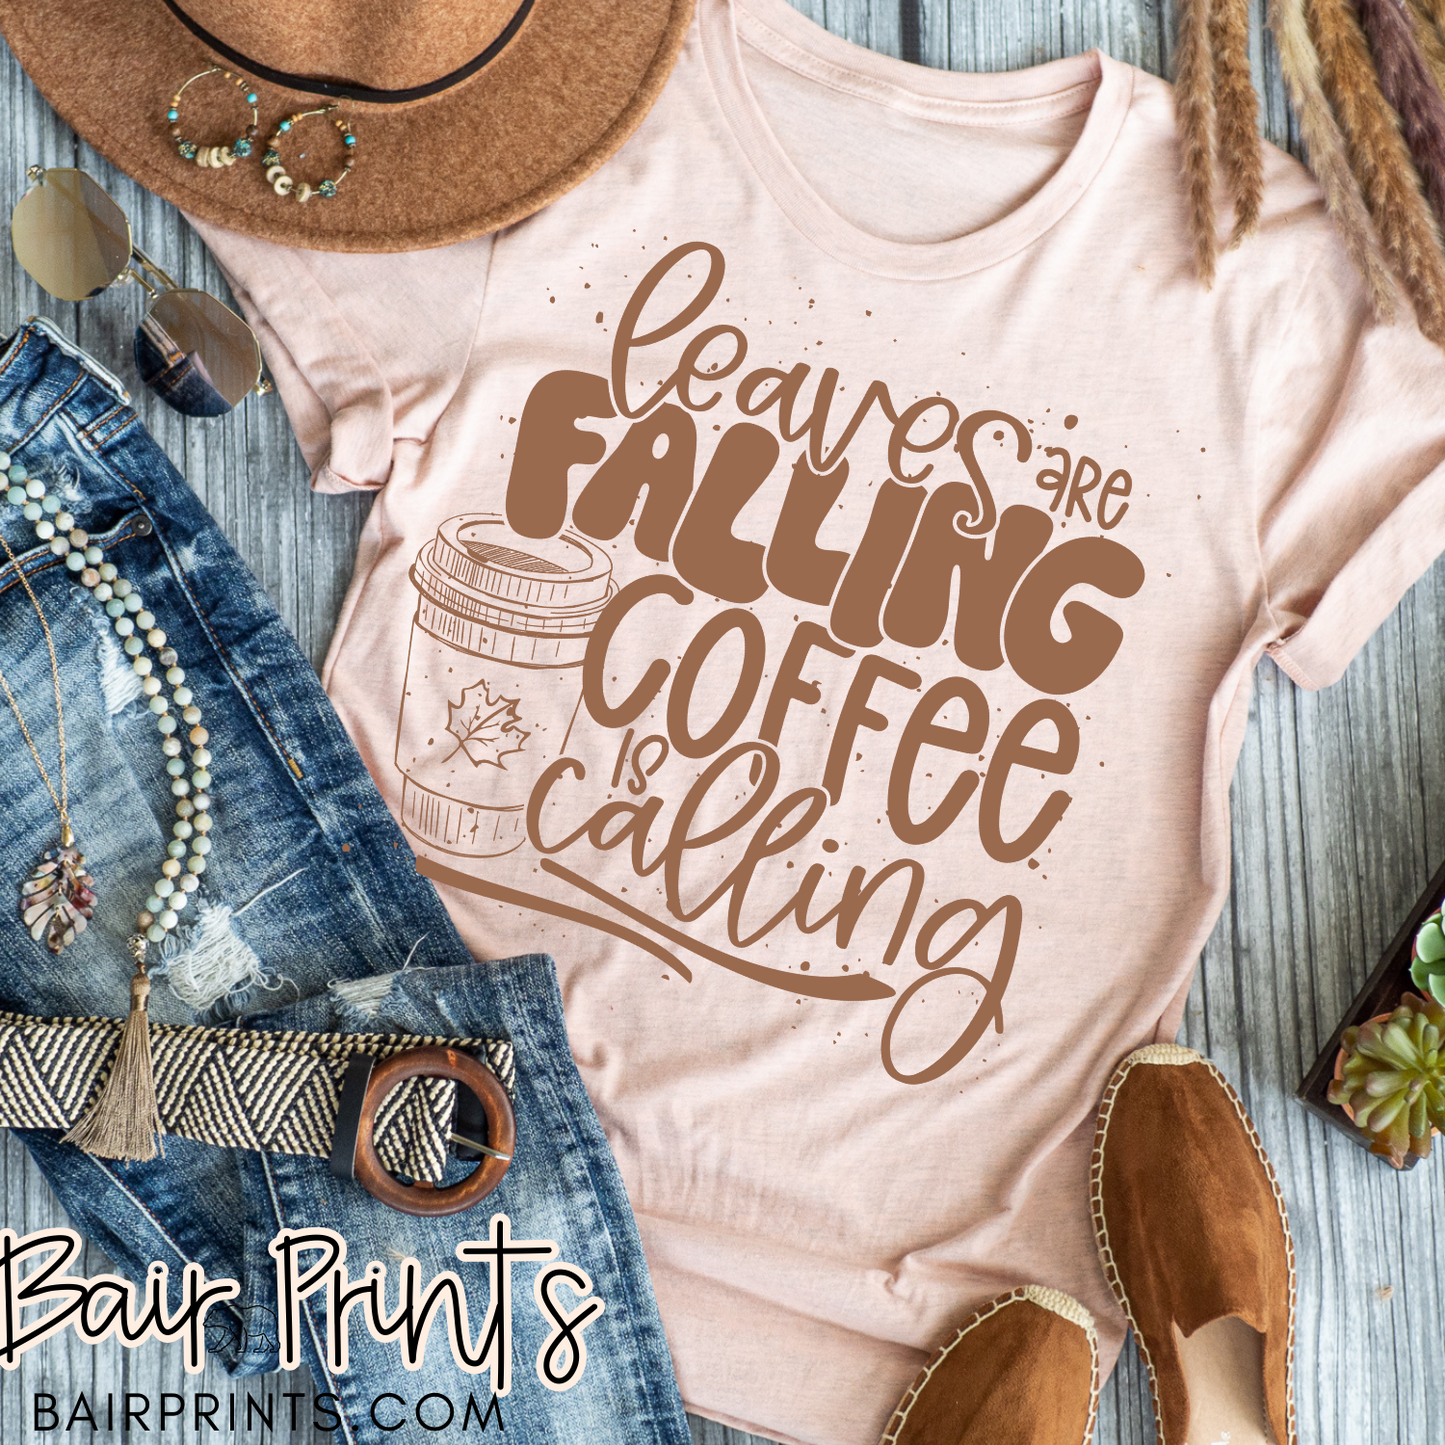 Leaves are Falling Coffee is Calling Tee